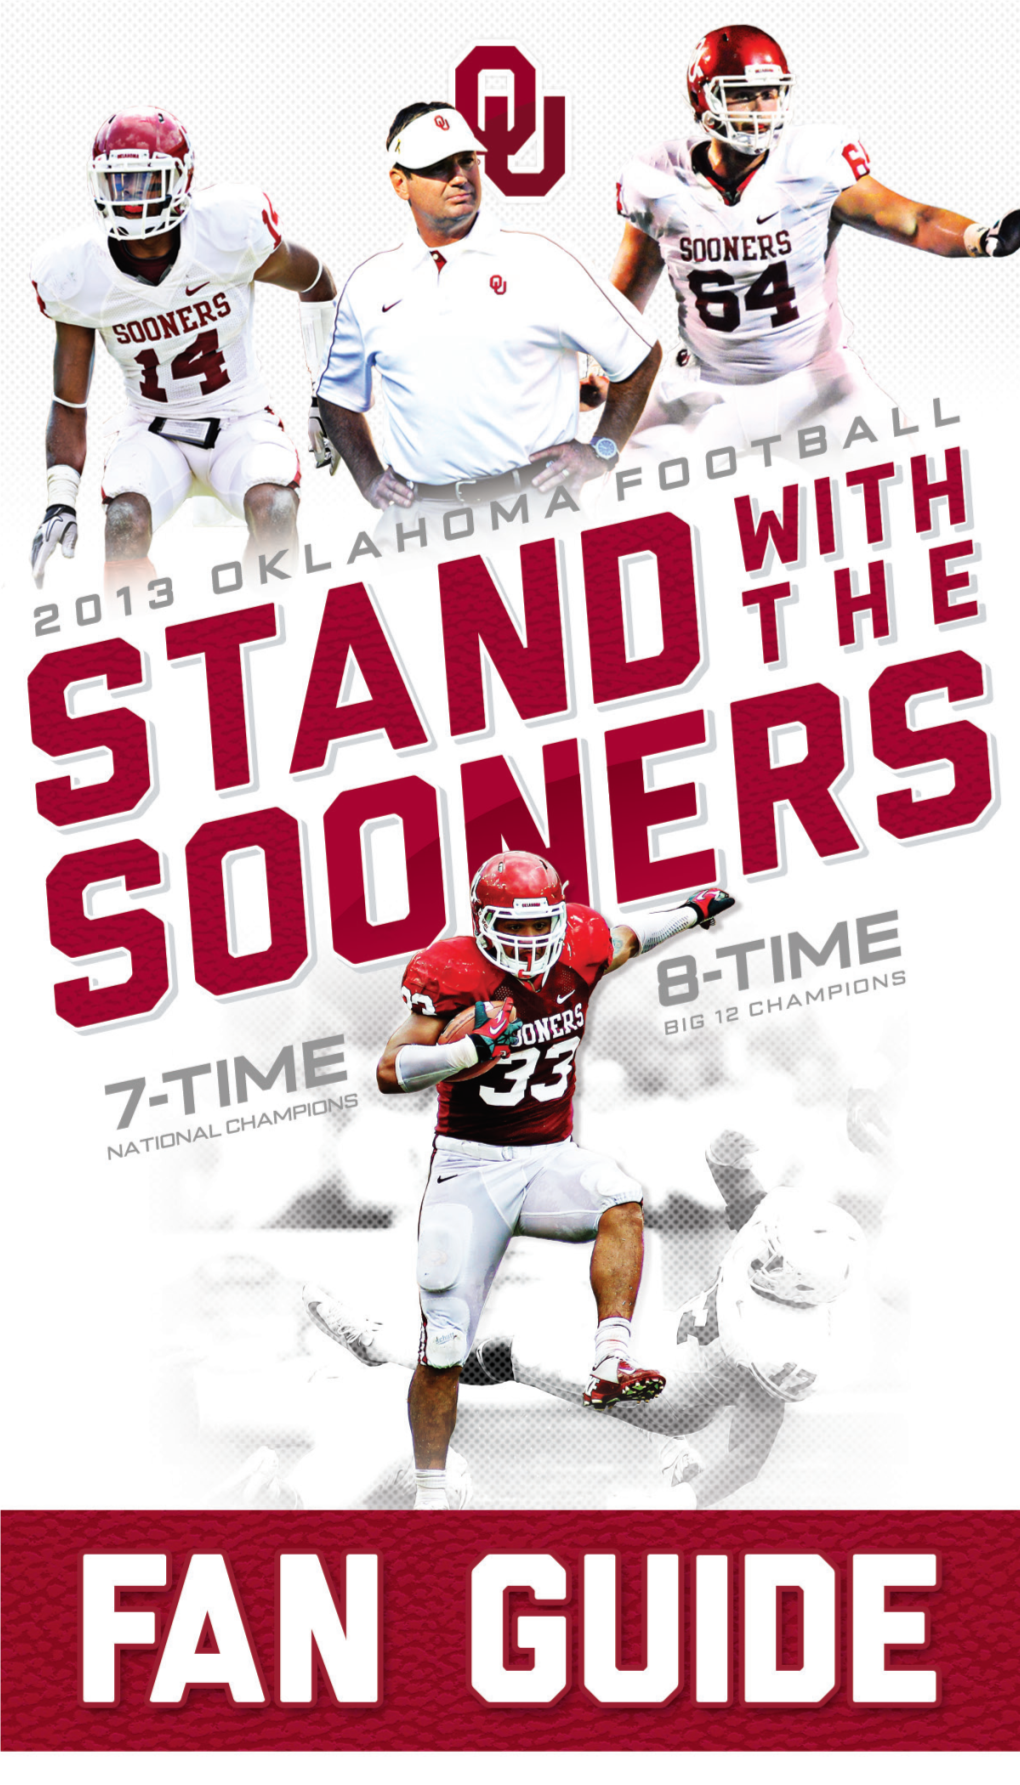 The Official Sooner Fan Guide Is Here